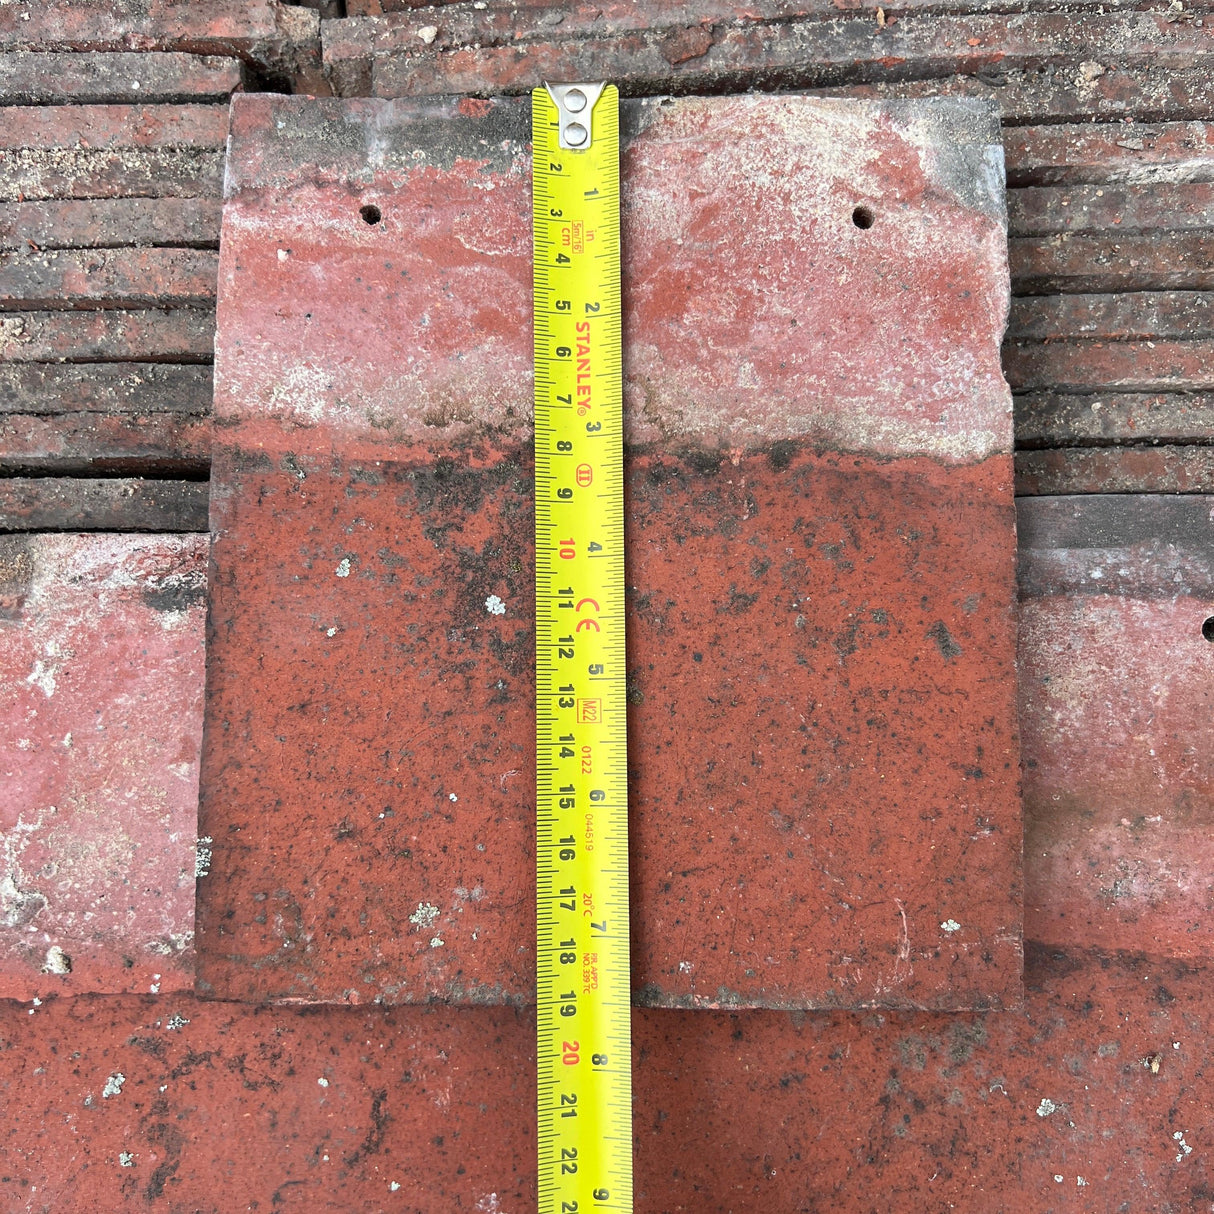 7.5” x 6.5” Dreadnought Red Eave Tiles - Reclaimed Brick Company